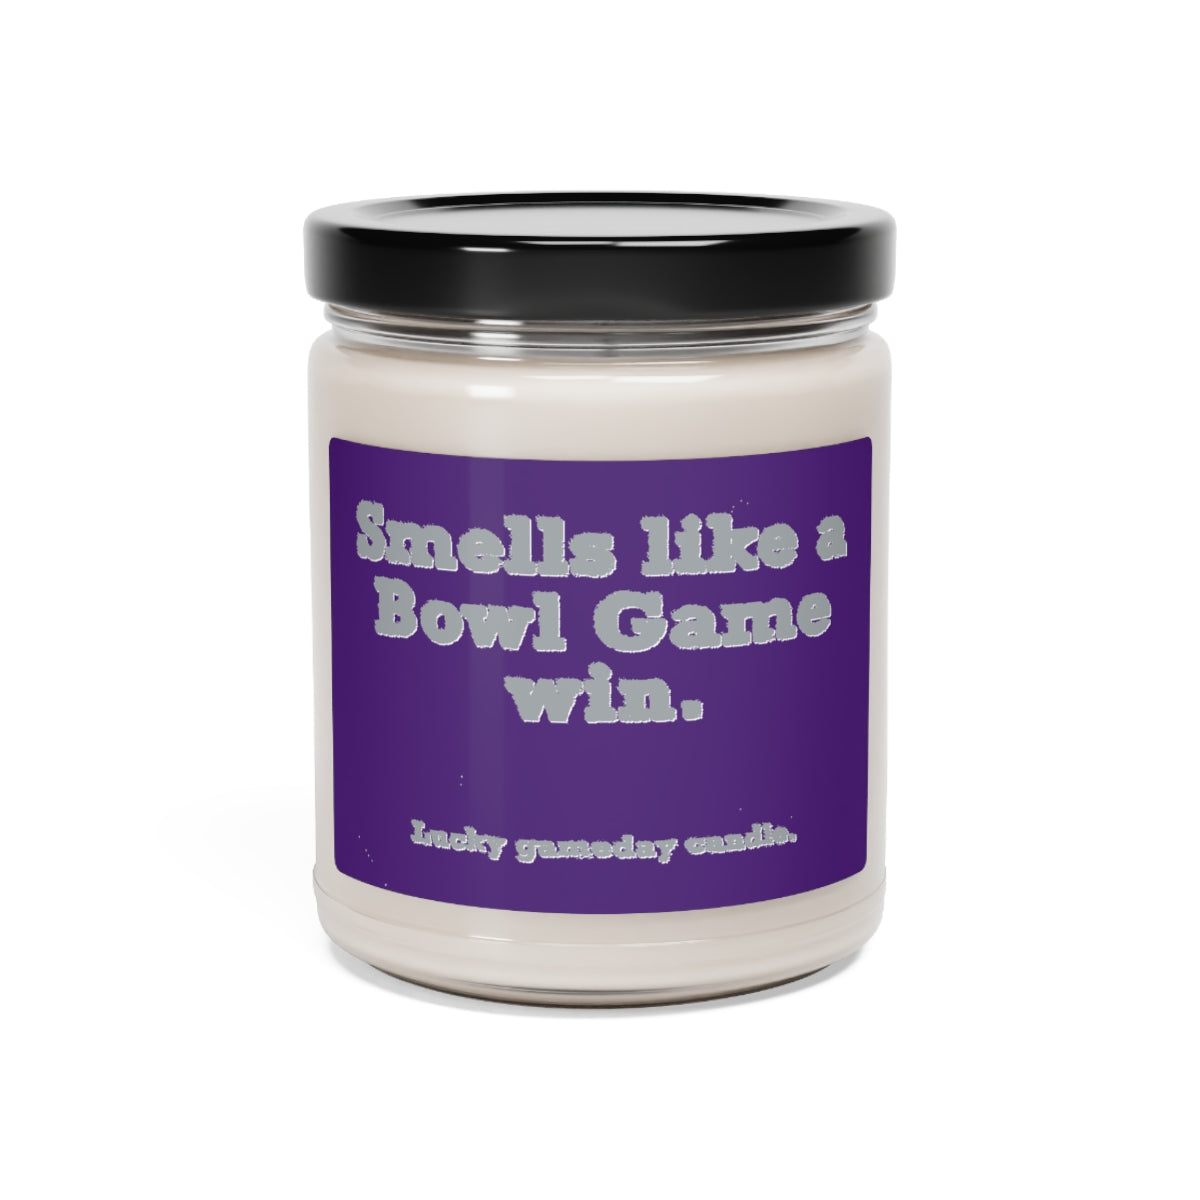 TCU - "Smells Like a Bowl Game Win" Scented Candle